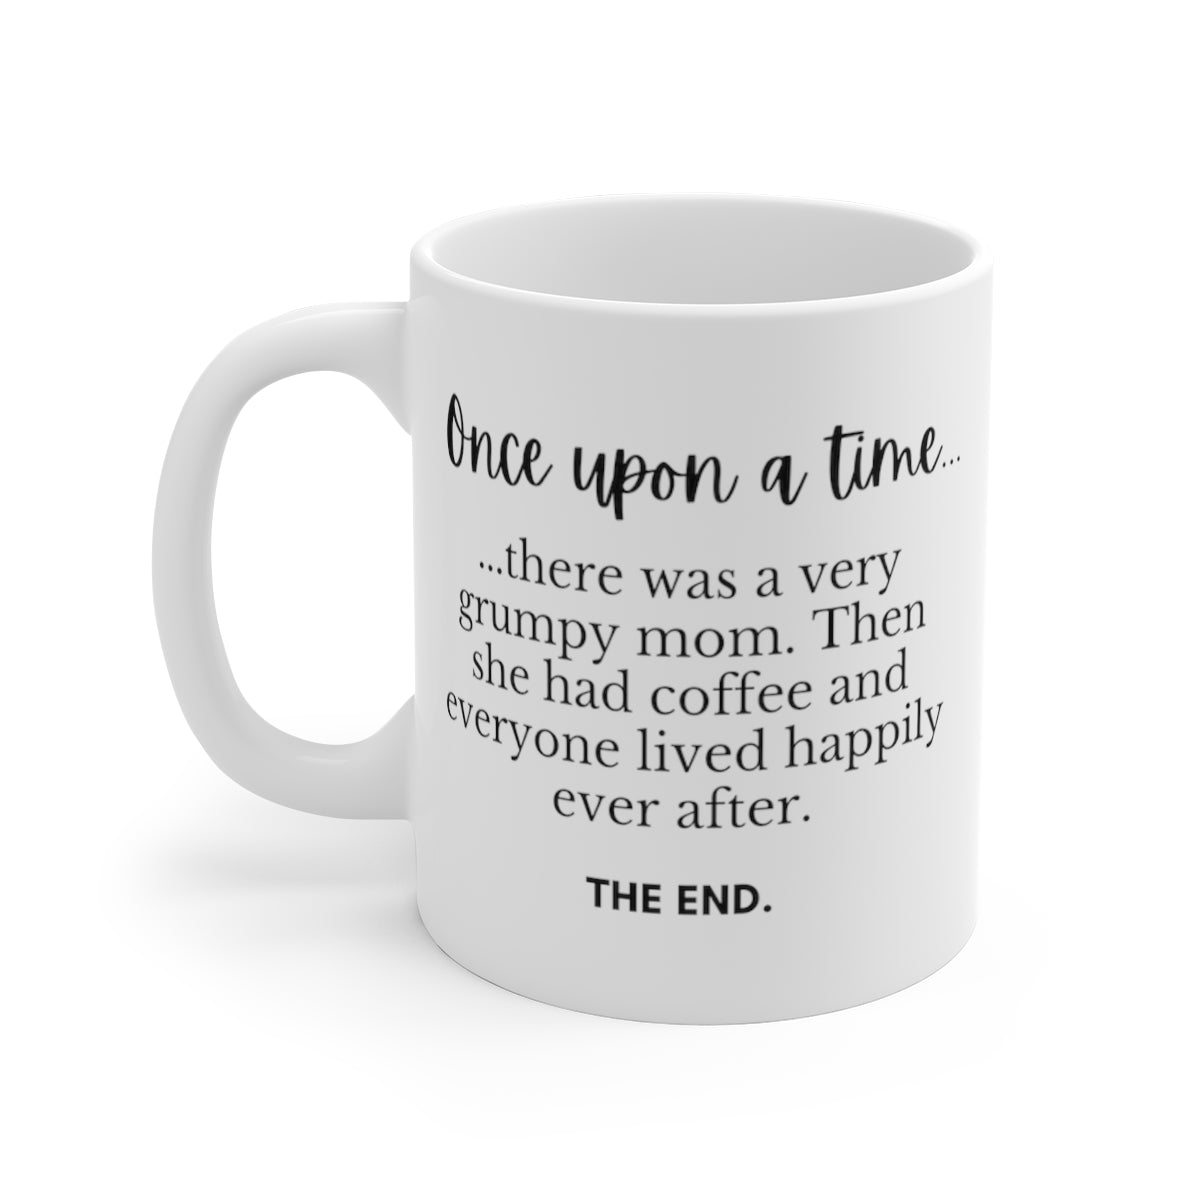 Once Upon A Time There Was A Very Grumpy Mom. Then She Had Coffee... | Funny Mug for Moms, Coffee Lovers | Mug 11oz